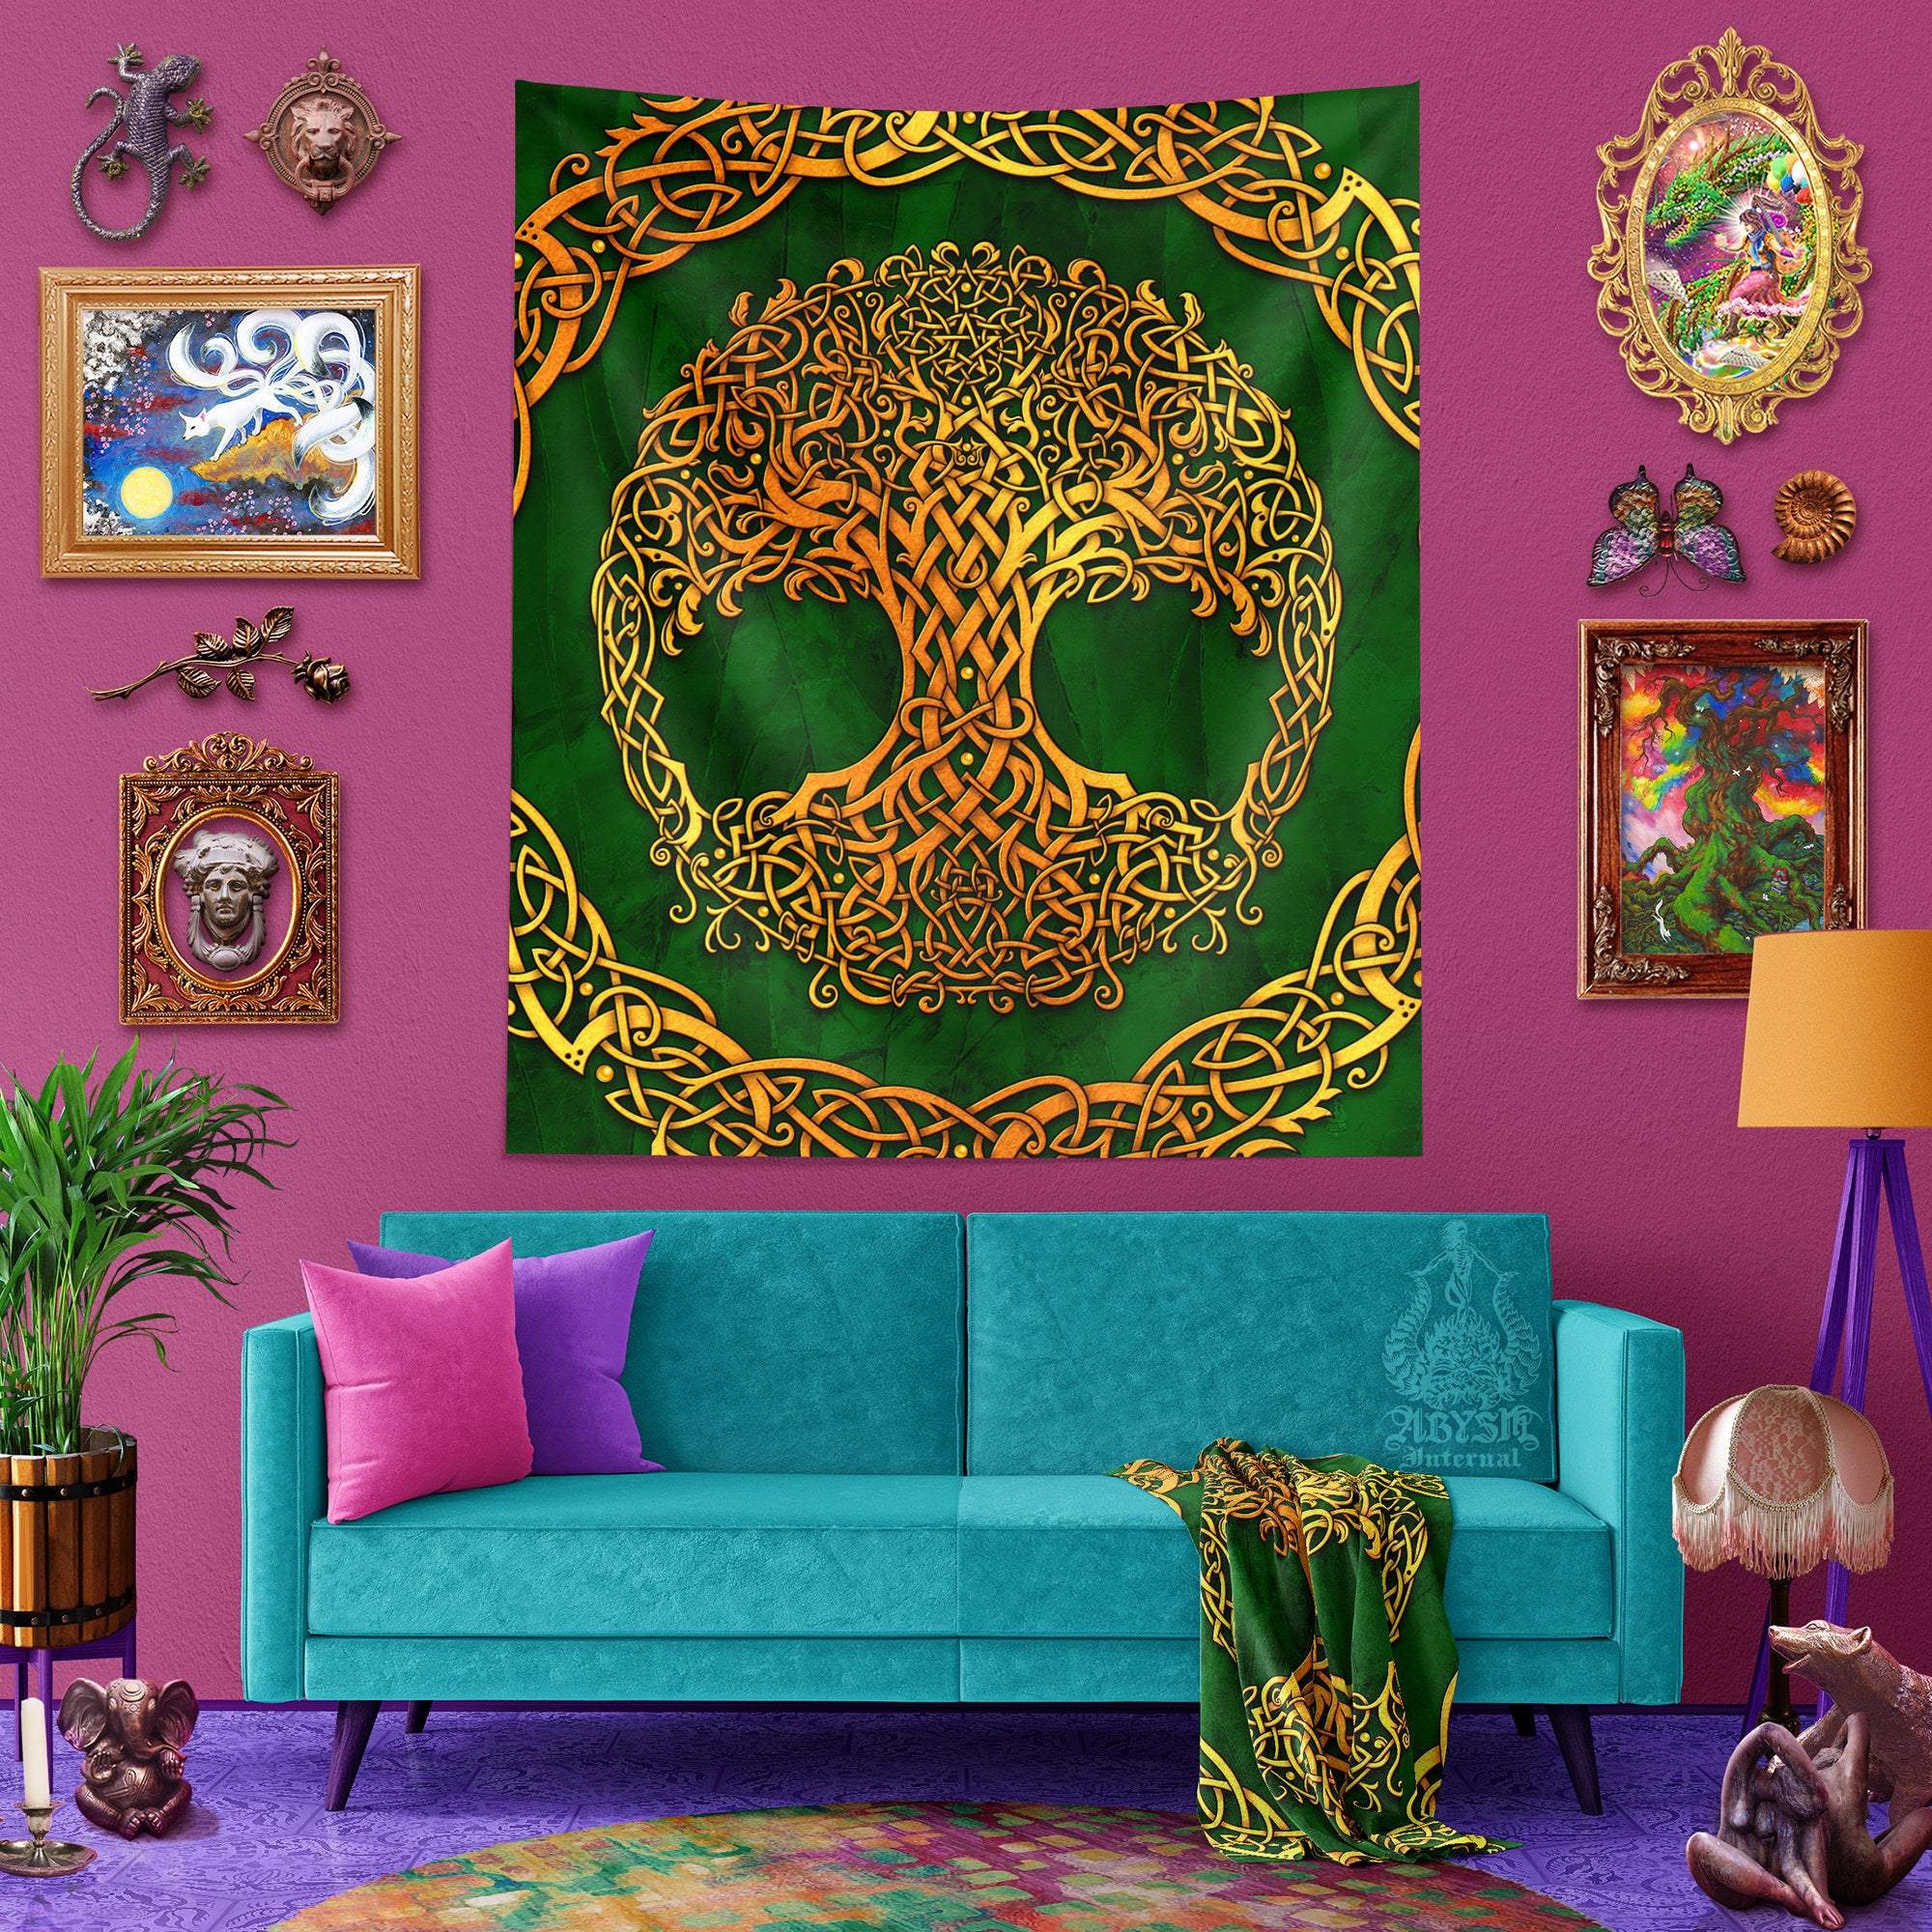 Tree of Life Tapestry, Celtic Wall Hanging, Pagan and Boho and Indie Home Decor, Art Print, Eclectic and Funky - Gold & 3 Colors - Abysm Internal